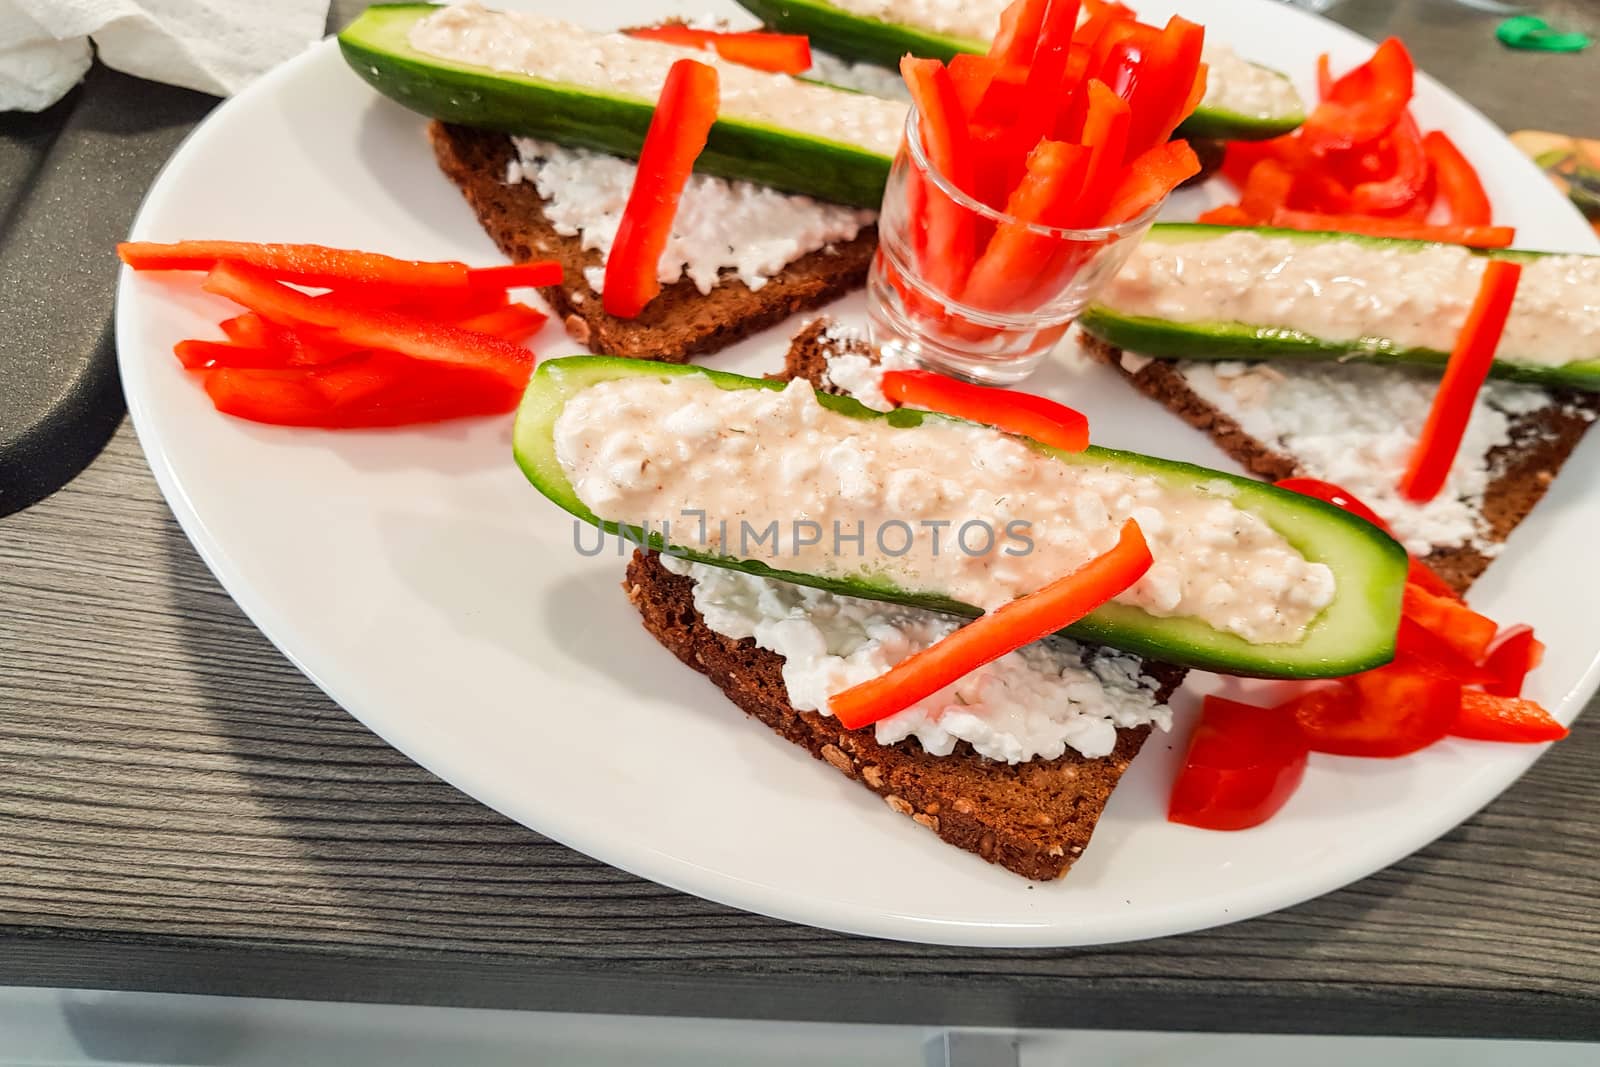 Cucumber cut in half with fresh quark and pepper strips stuffed on black bread. A low-calorie meal and vegan entree